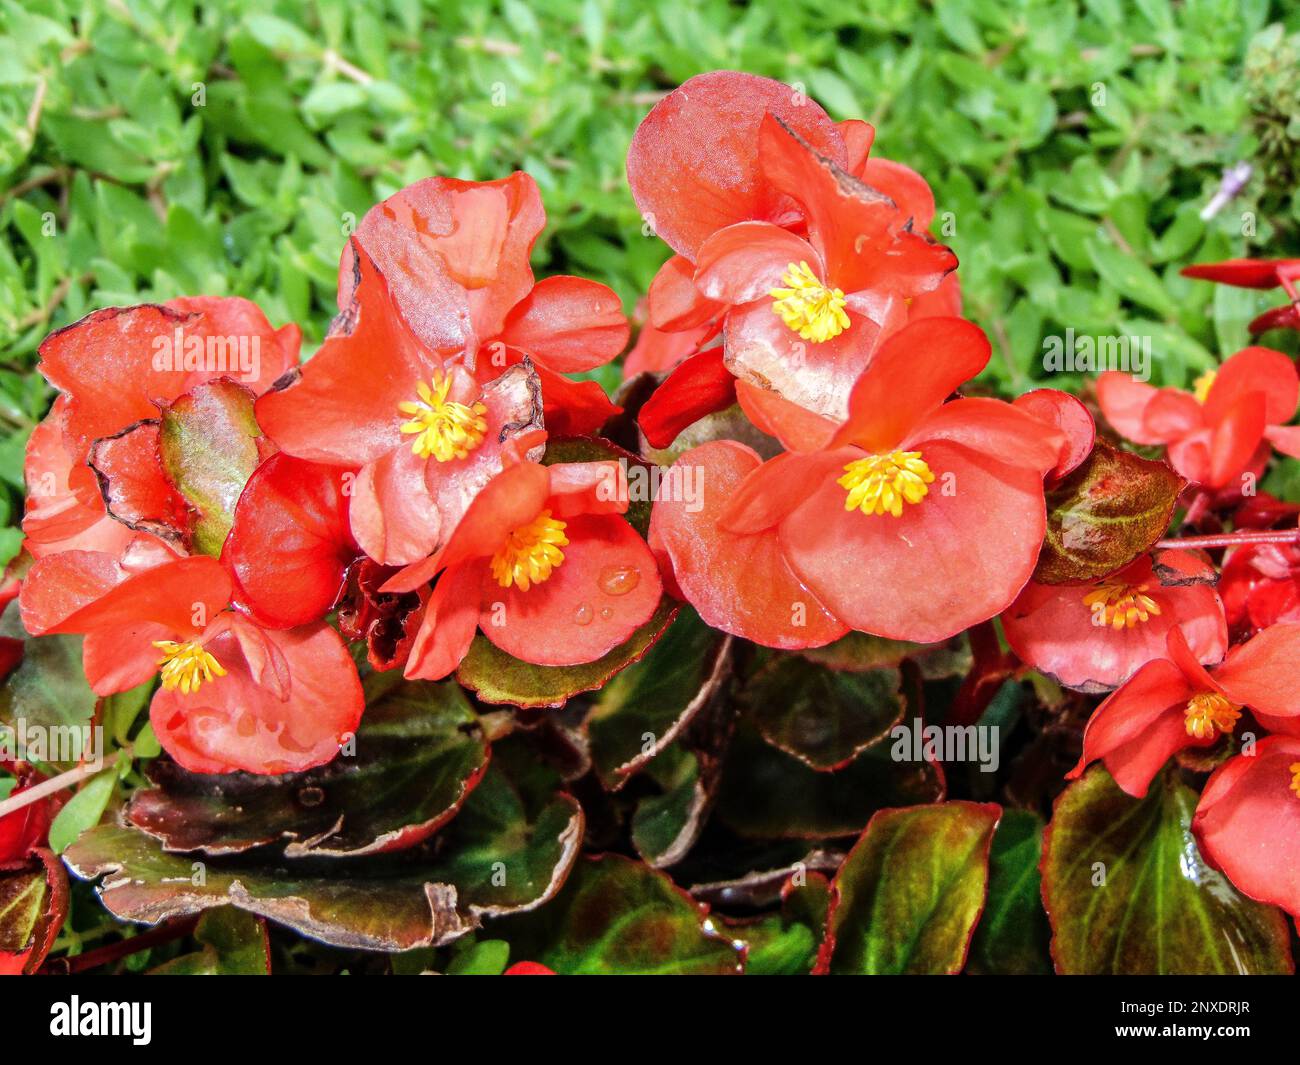 Red wax Begonia flowers. Begonia cucullata Stock Photo